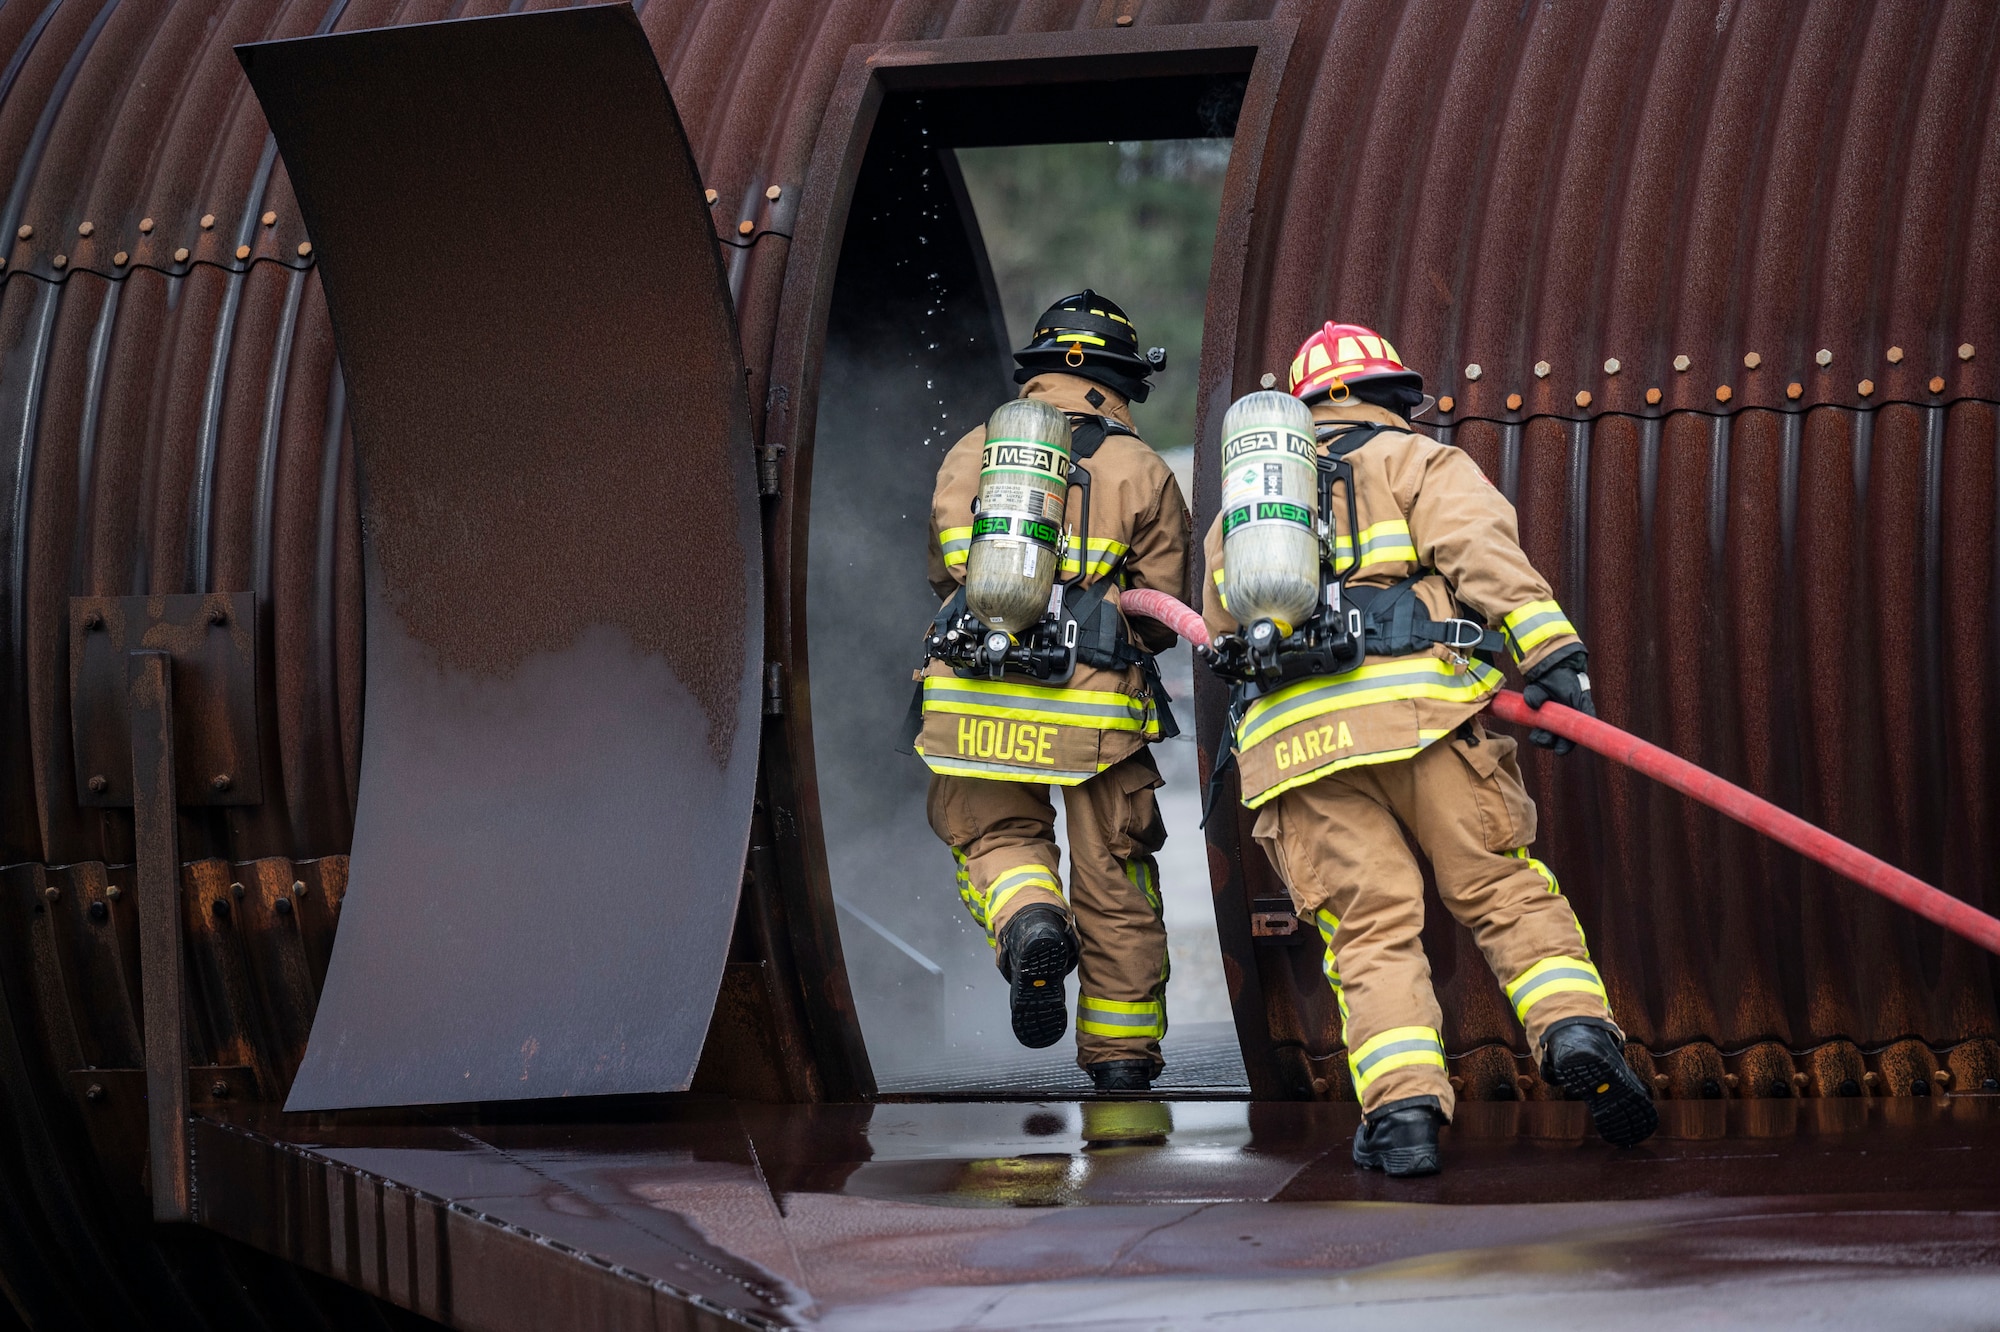 Citizen Airman, assigned to the 932nd Airlift Wing, Mission Support Group, participate in firefighter contingency training at Dobbins Air Force Base, Ga., March 18, 2021. The two week training culminated in three days filled with various types of fires and rescue calls. (U.S. Air Force Photo by Mr. Christopher Parr)